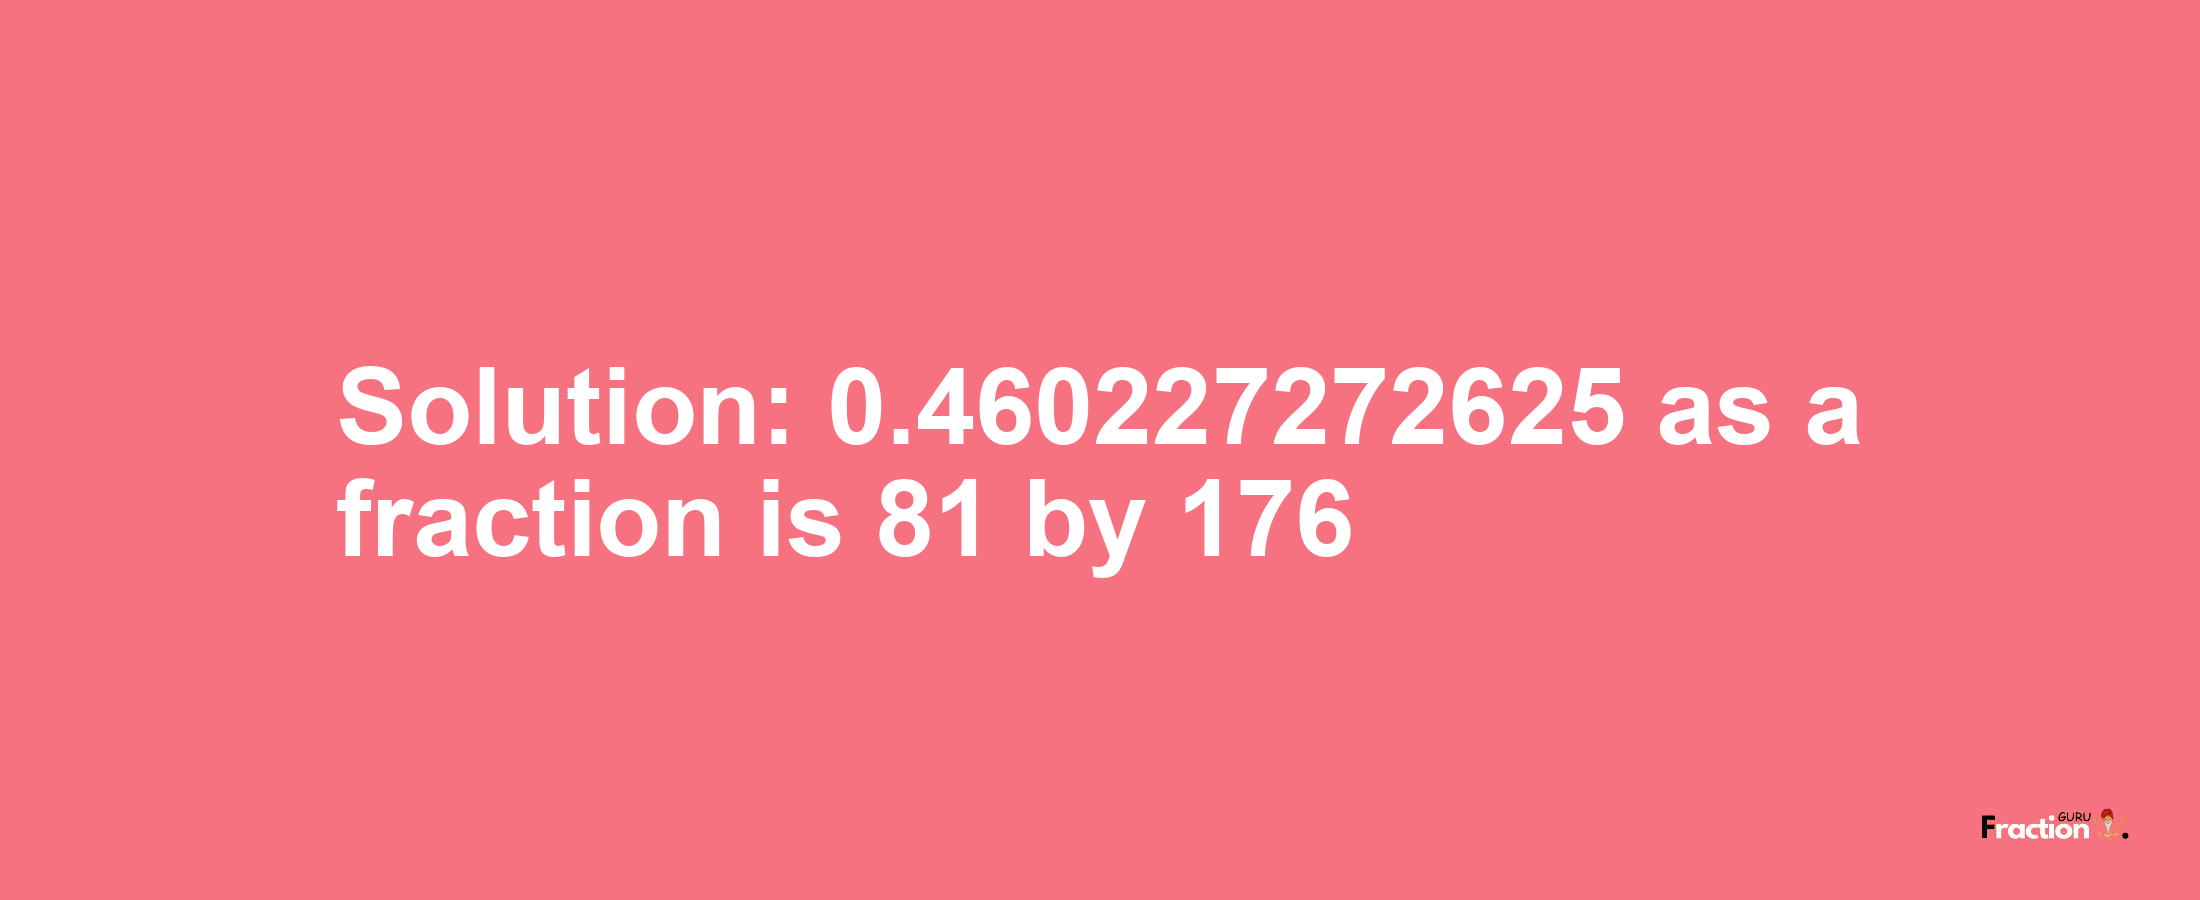 Solution:0.460227272625 as a fraction is 81/176